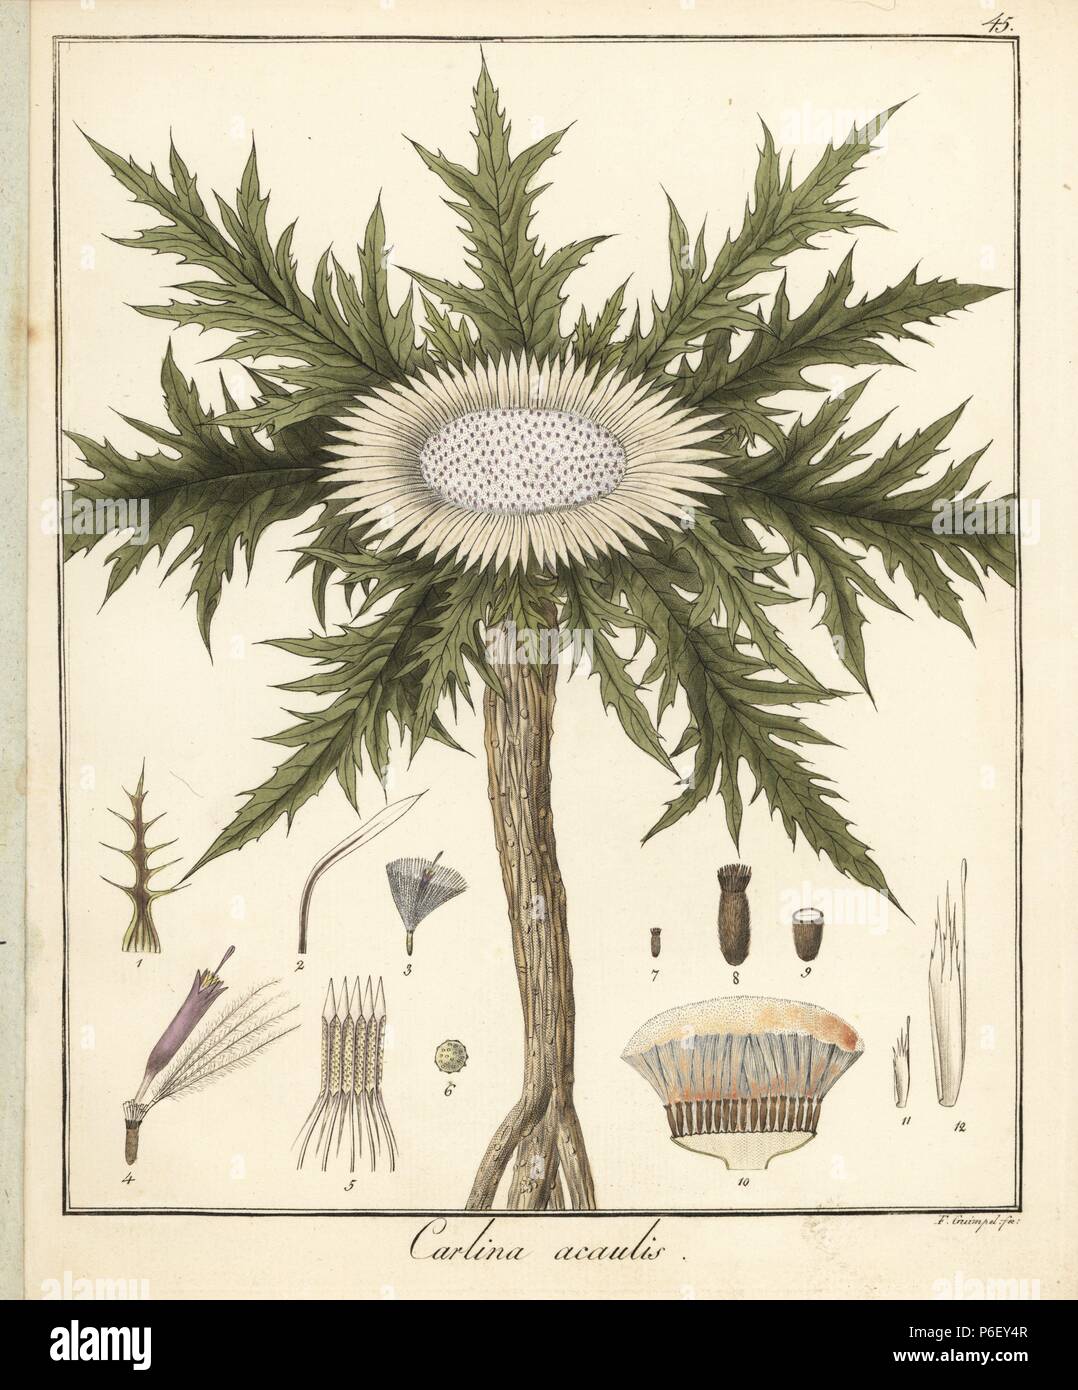 Dwarf carline thistle, Carlina acaulis. Handcoloured copperplate engraving by F. Guimpel from Dr. Friedrich Gottlob Hayne's Medical Botany, Berlin, 1822. Hayne (1763-1832) was a German botanist, apothecary and professor of pharmaceutical botany at Berlin University. Stock Photo